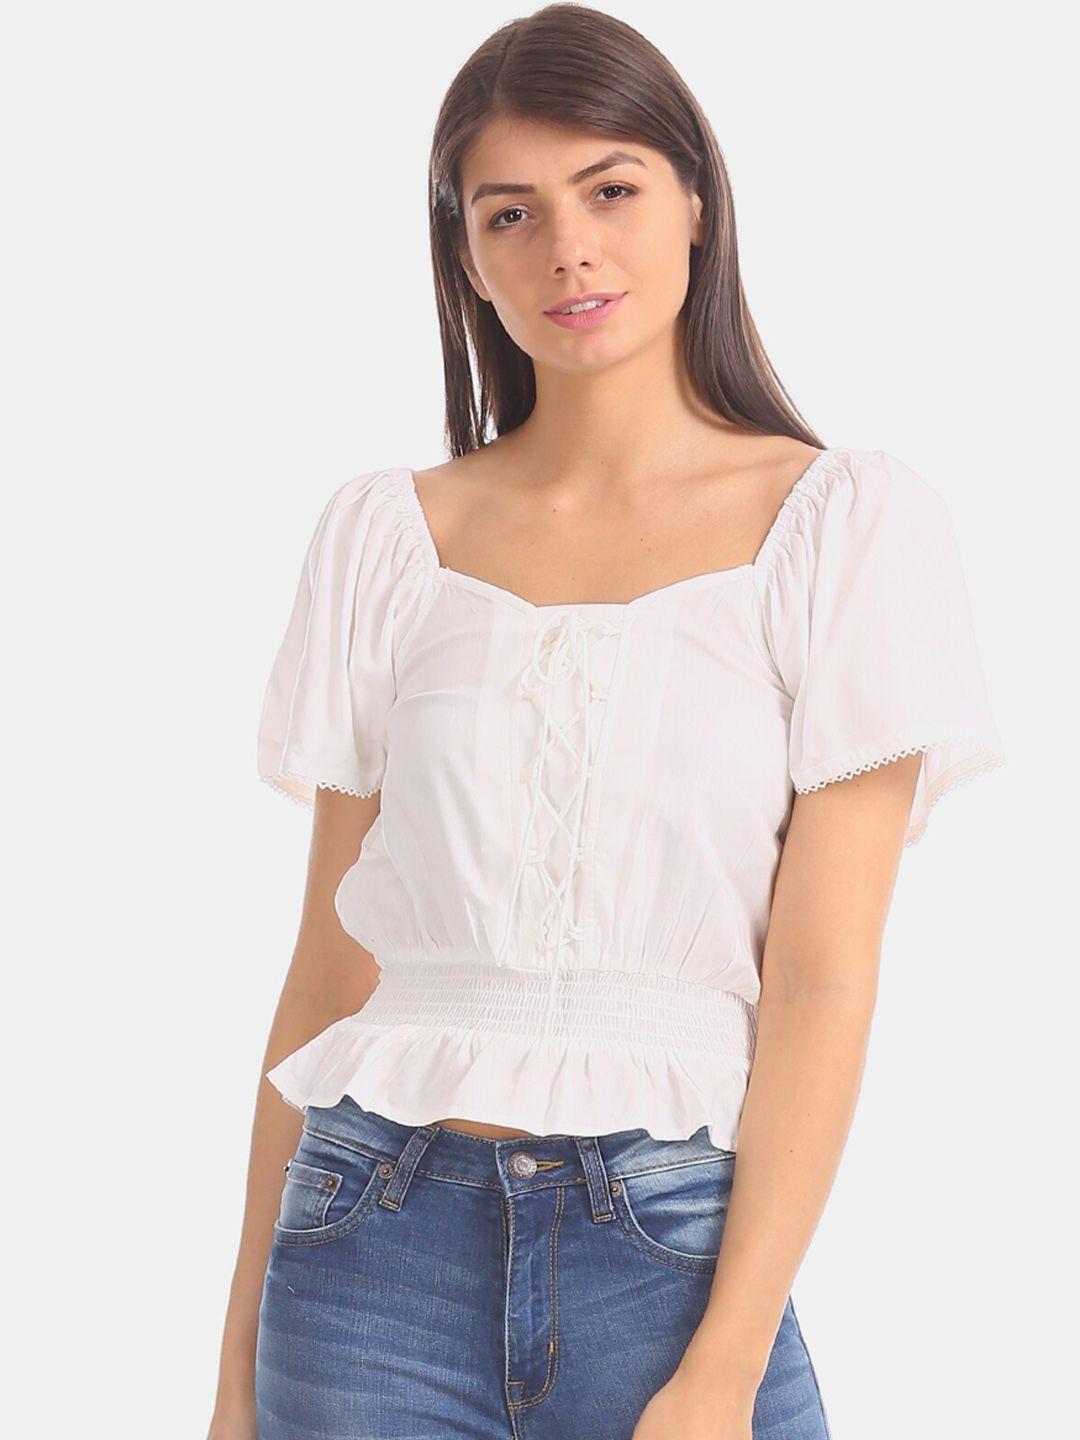 aeropostale women white solid cinched waist top